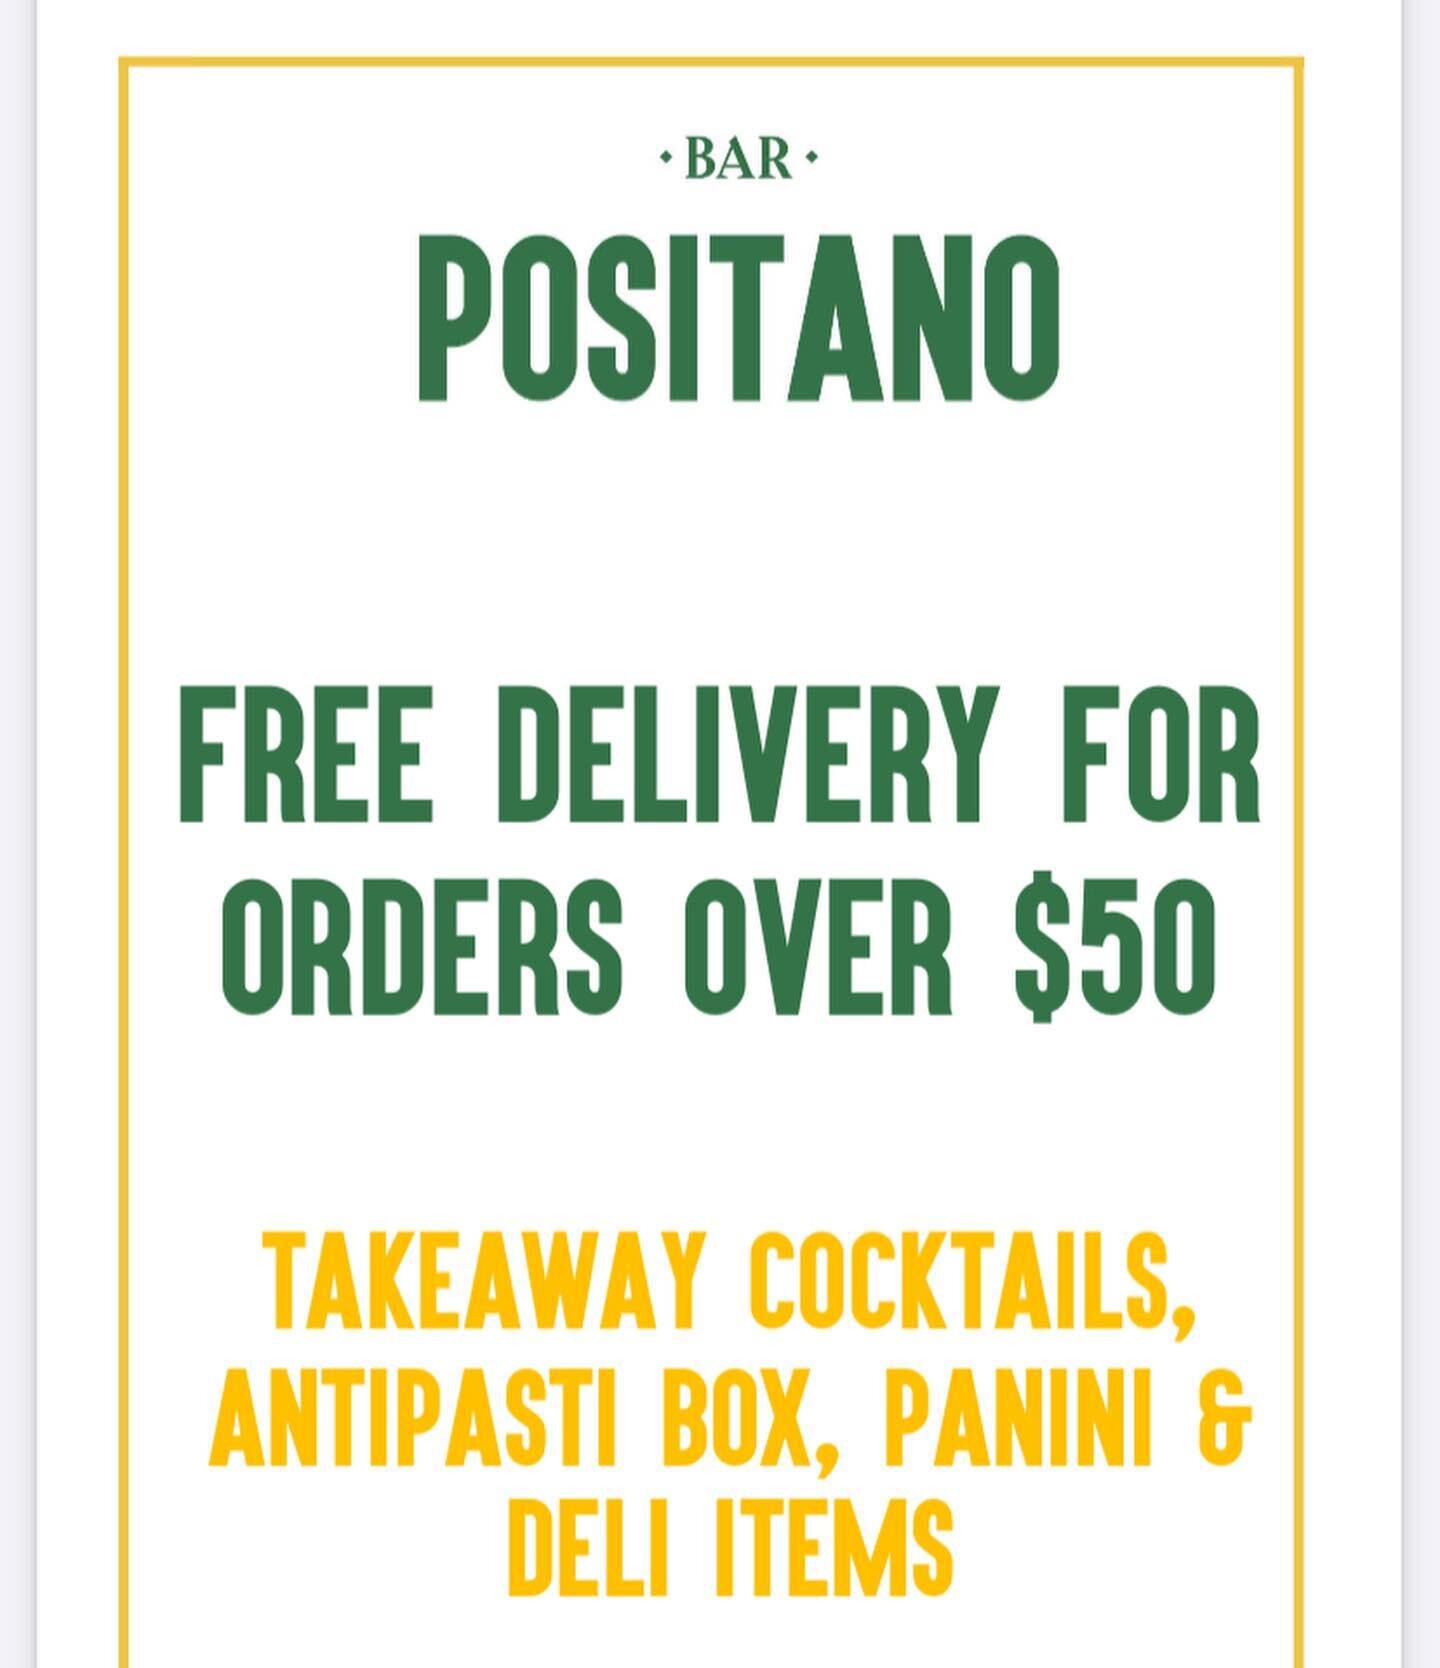 Free delivery for orders over $50. Call or DM to order!